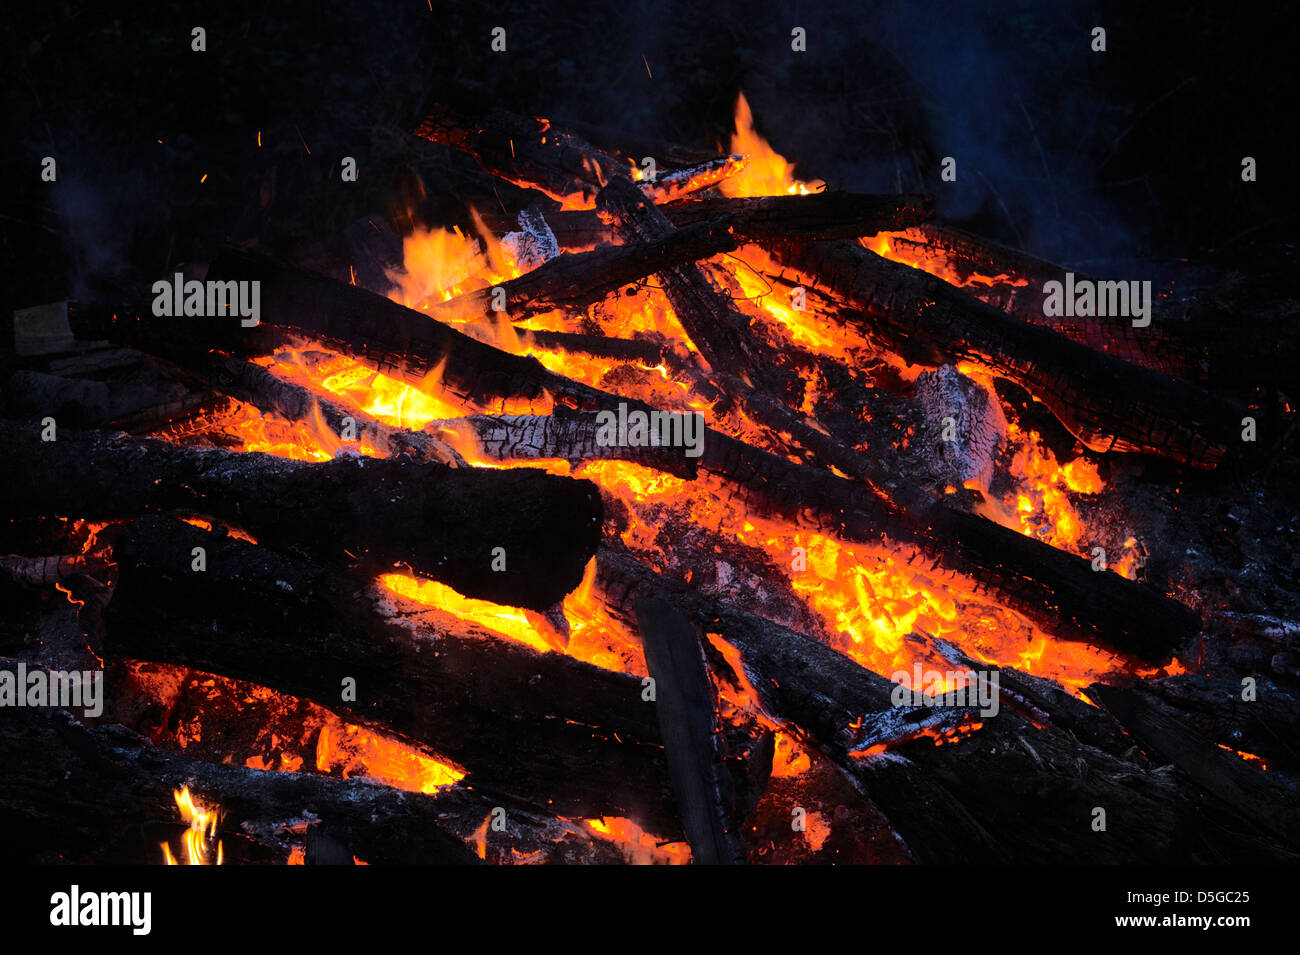 Glowing embers of a bonfire. Stock Photo